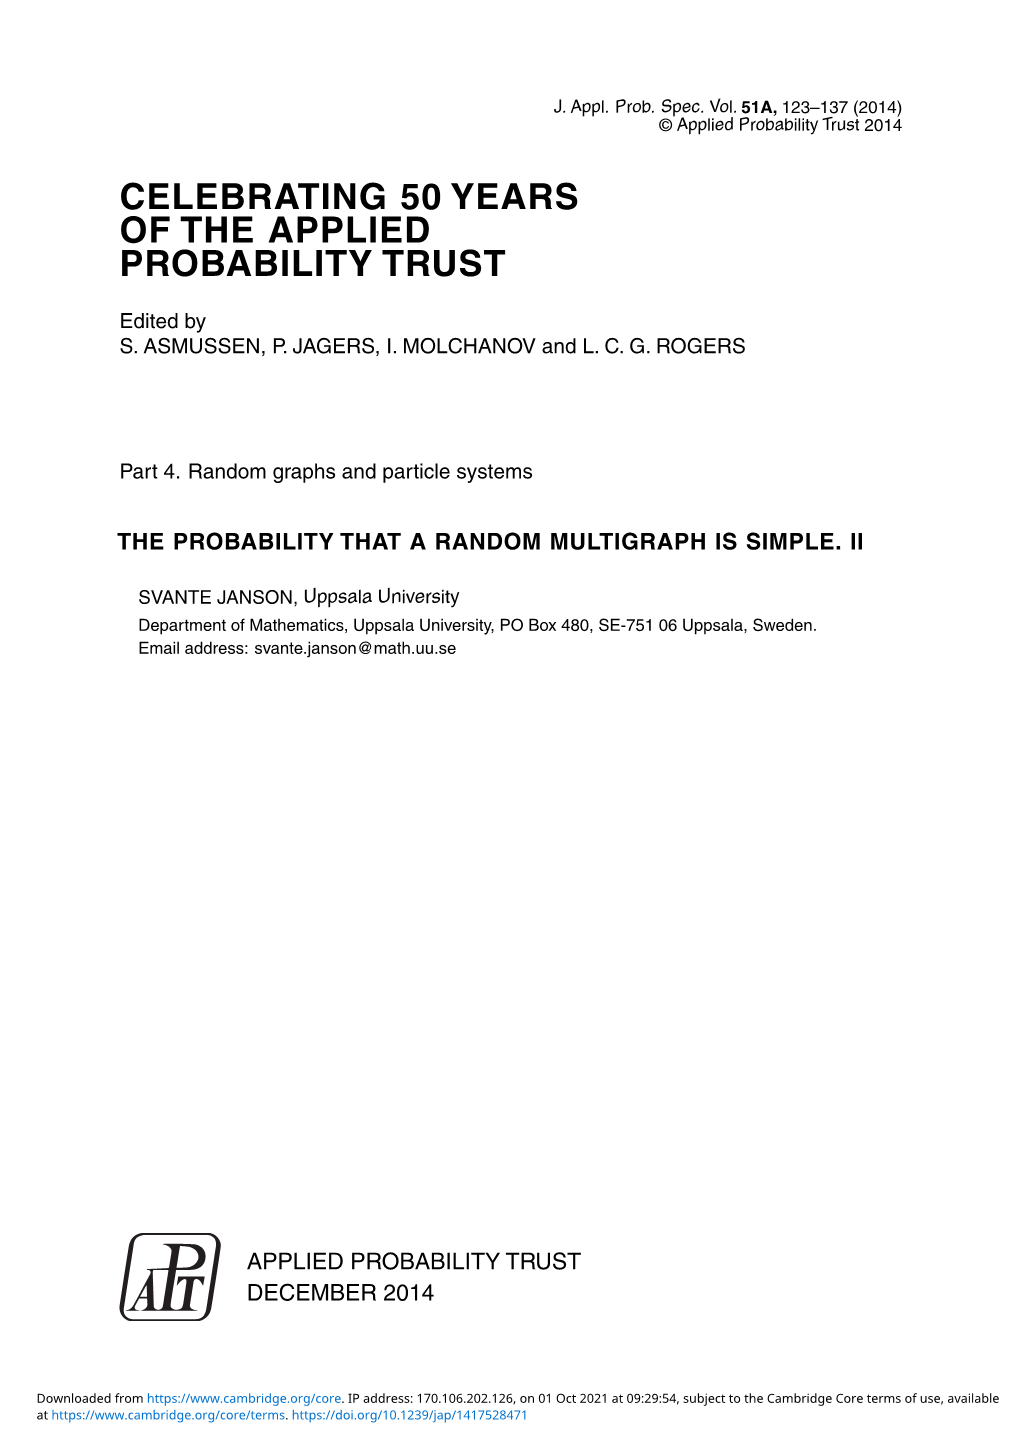 Celebrating 50 Years of the Applied Probability Trust